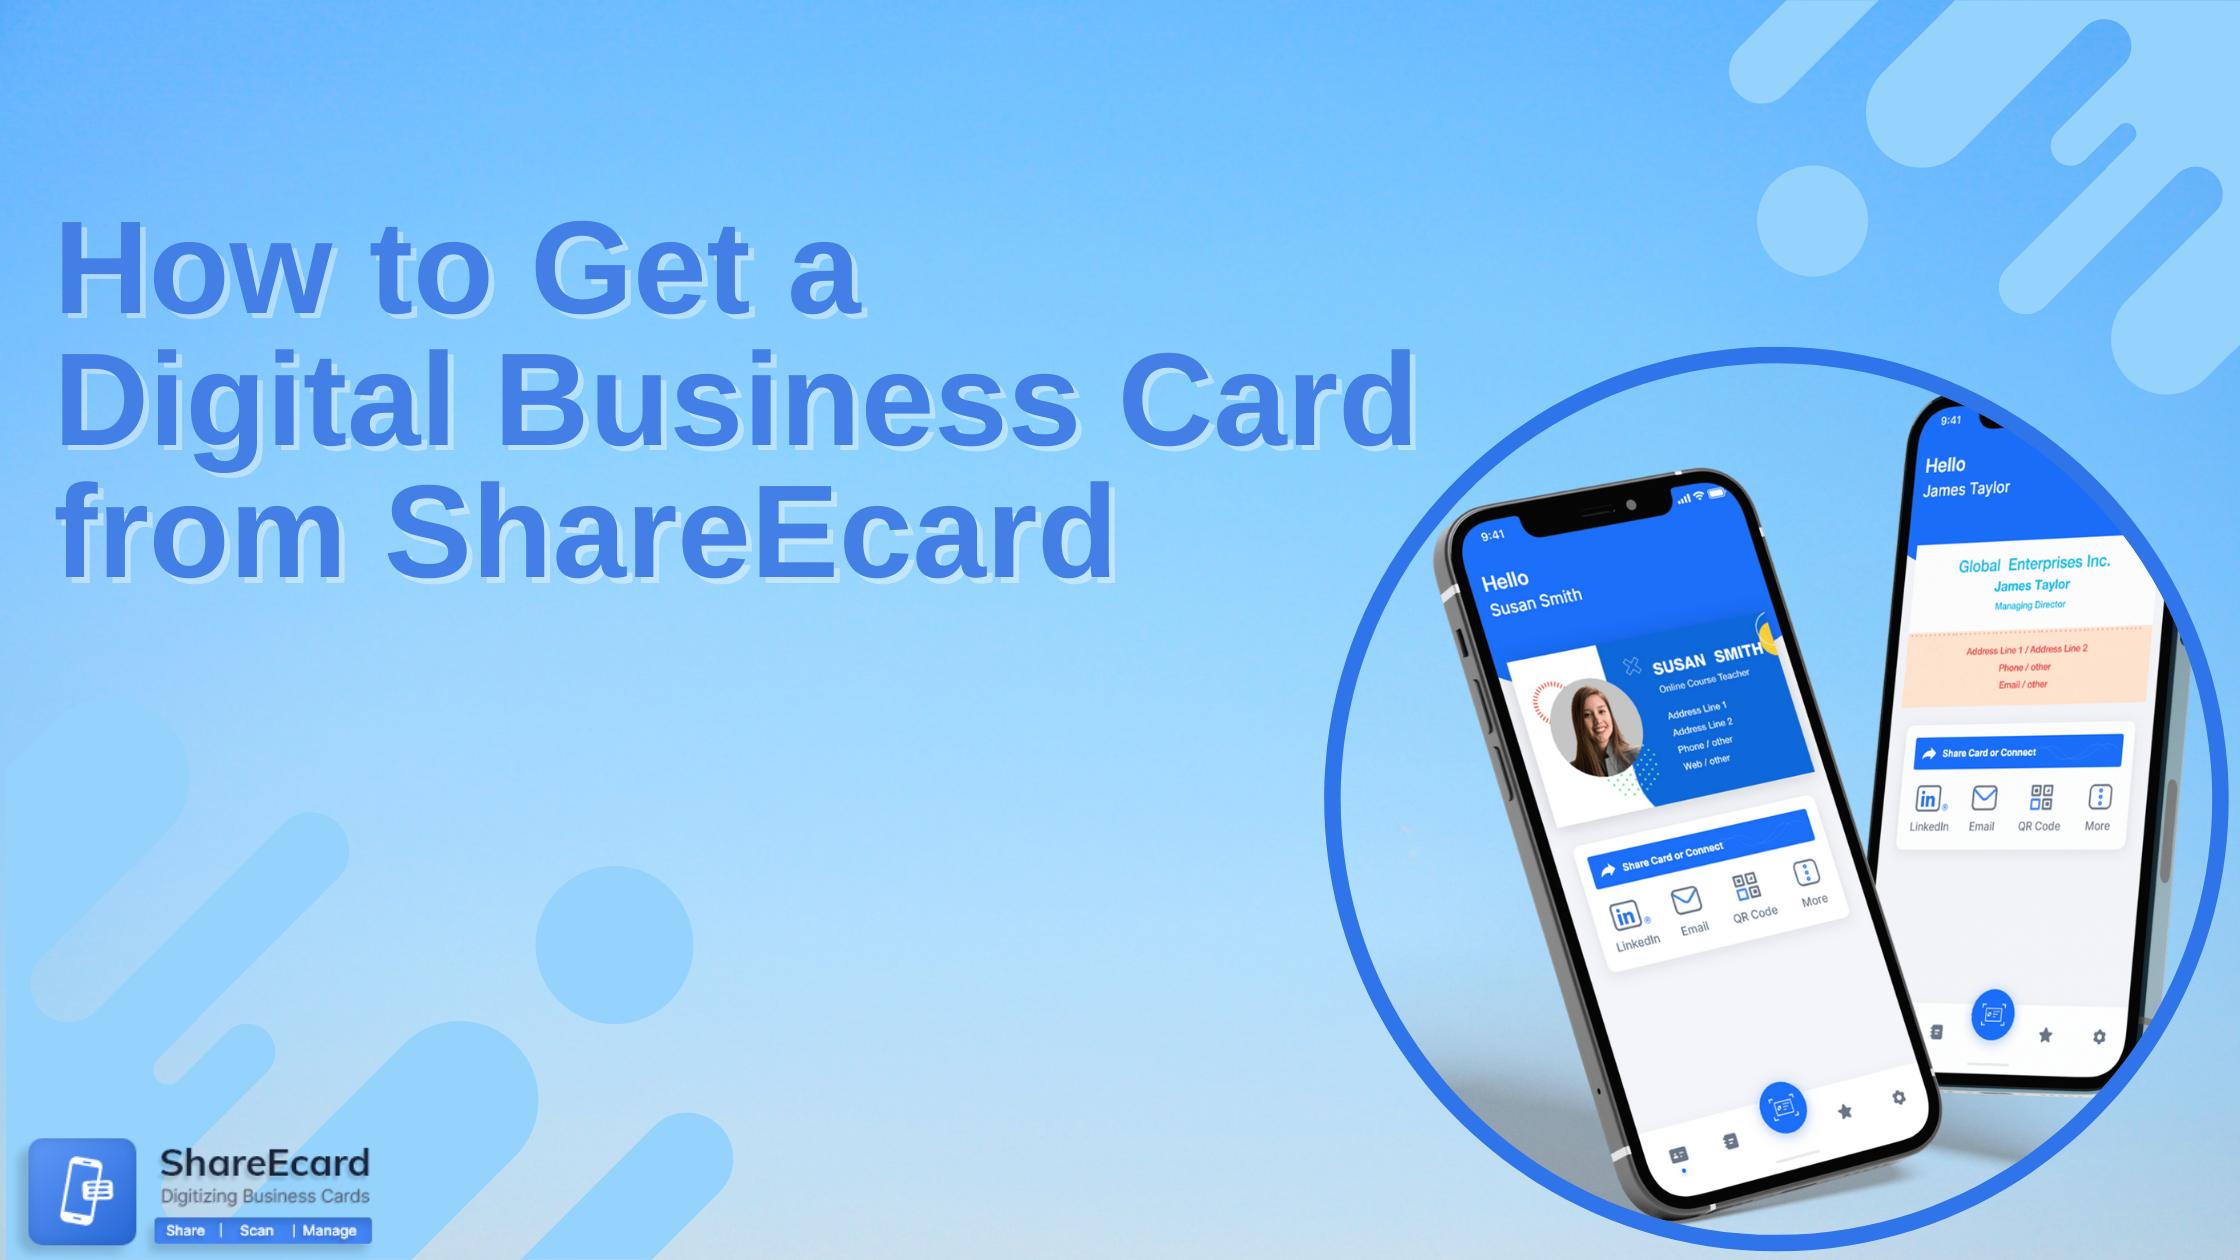 How to Get a Digital Business Card from ShareEcard